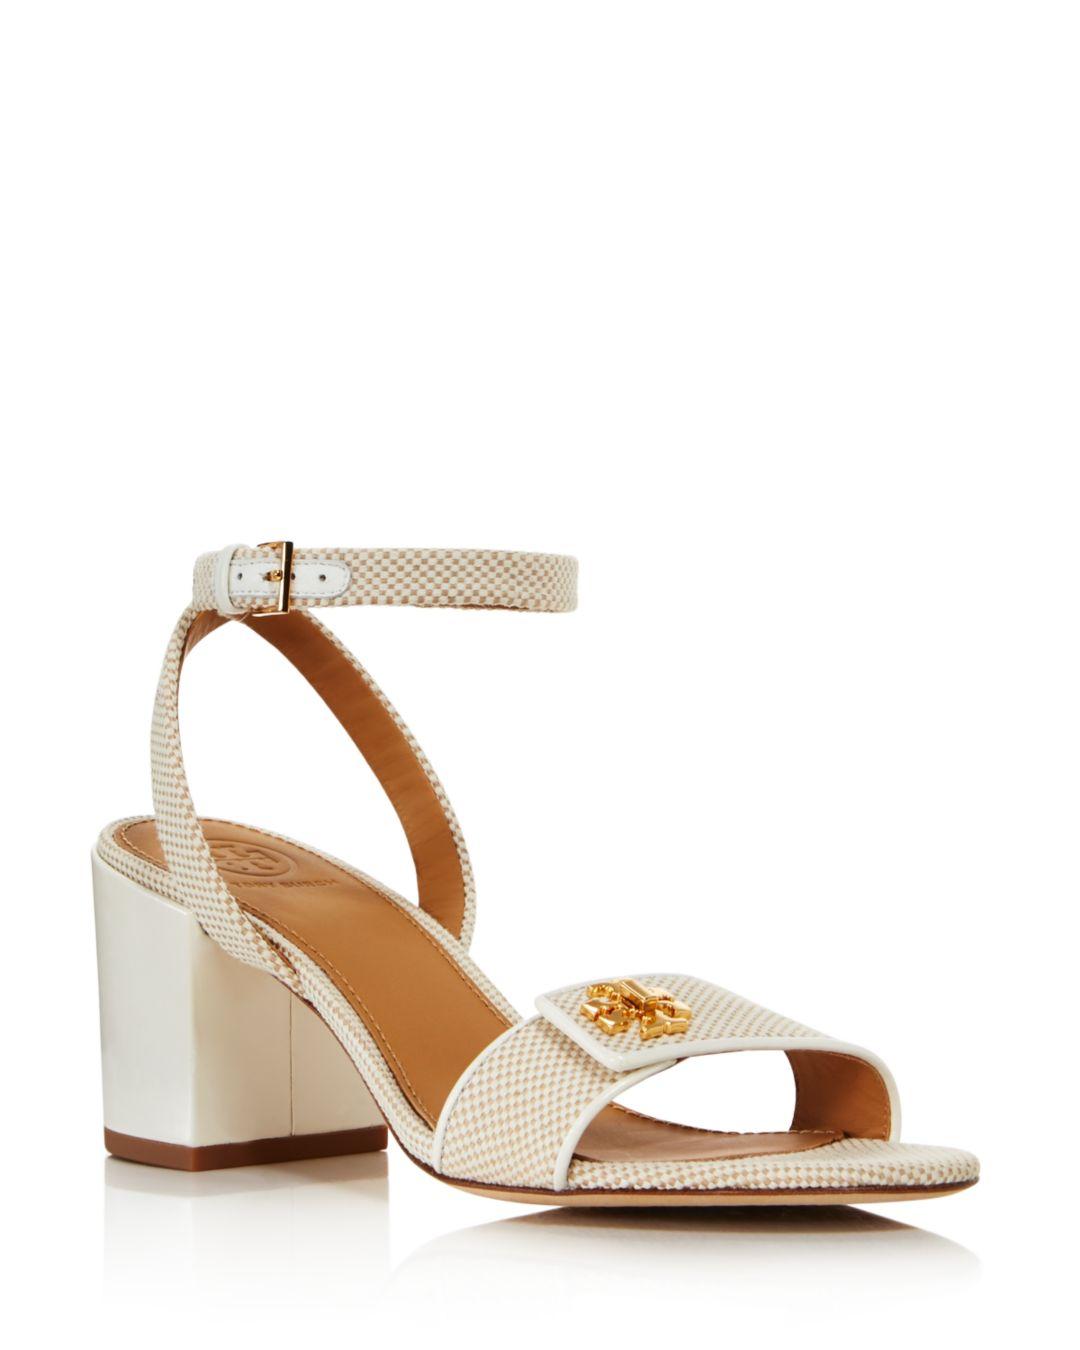 Tory Burch Kira Canvas And Leather Sandals in Natural | Lyst